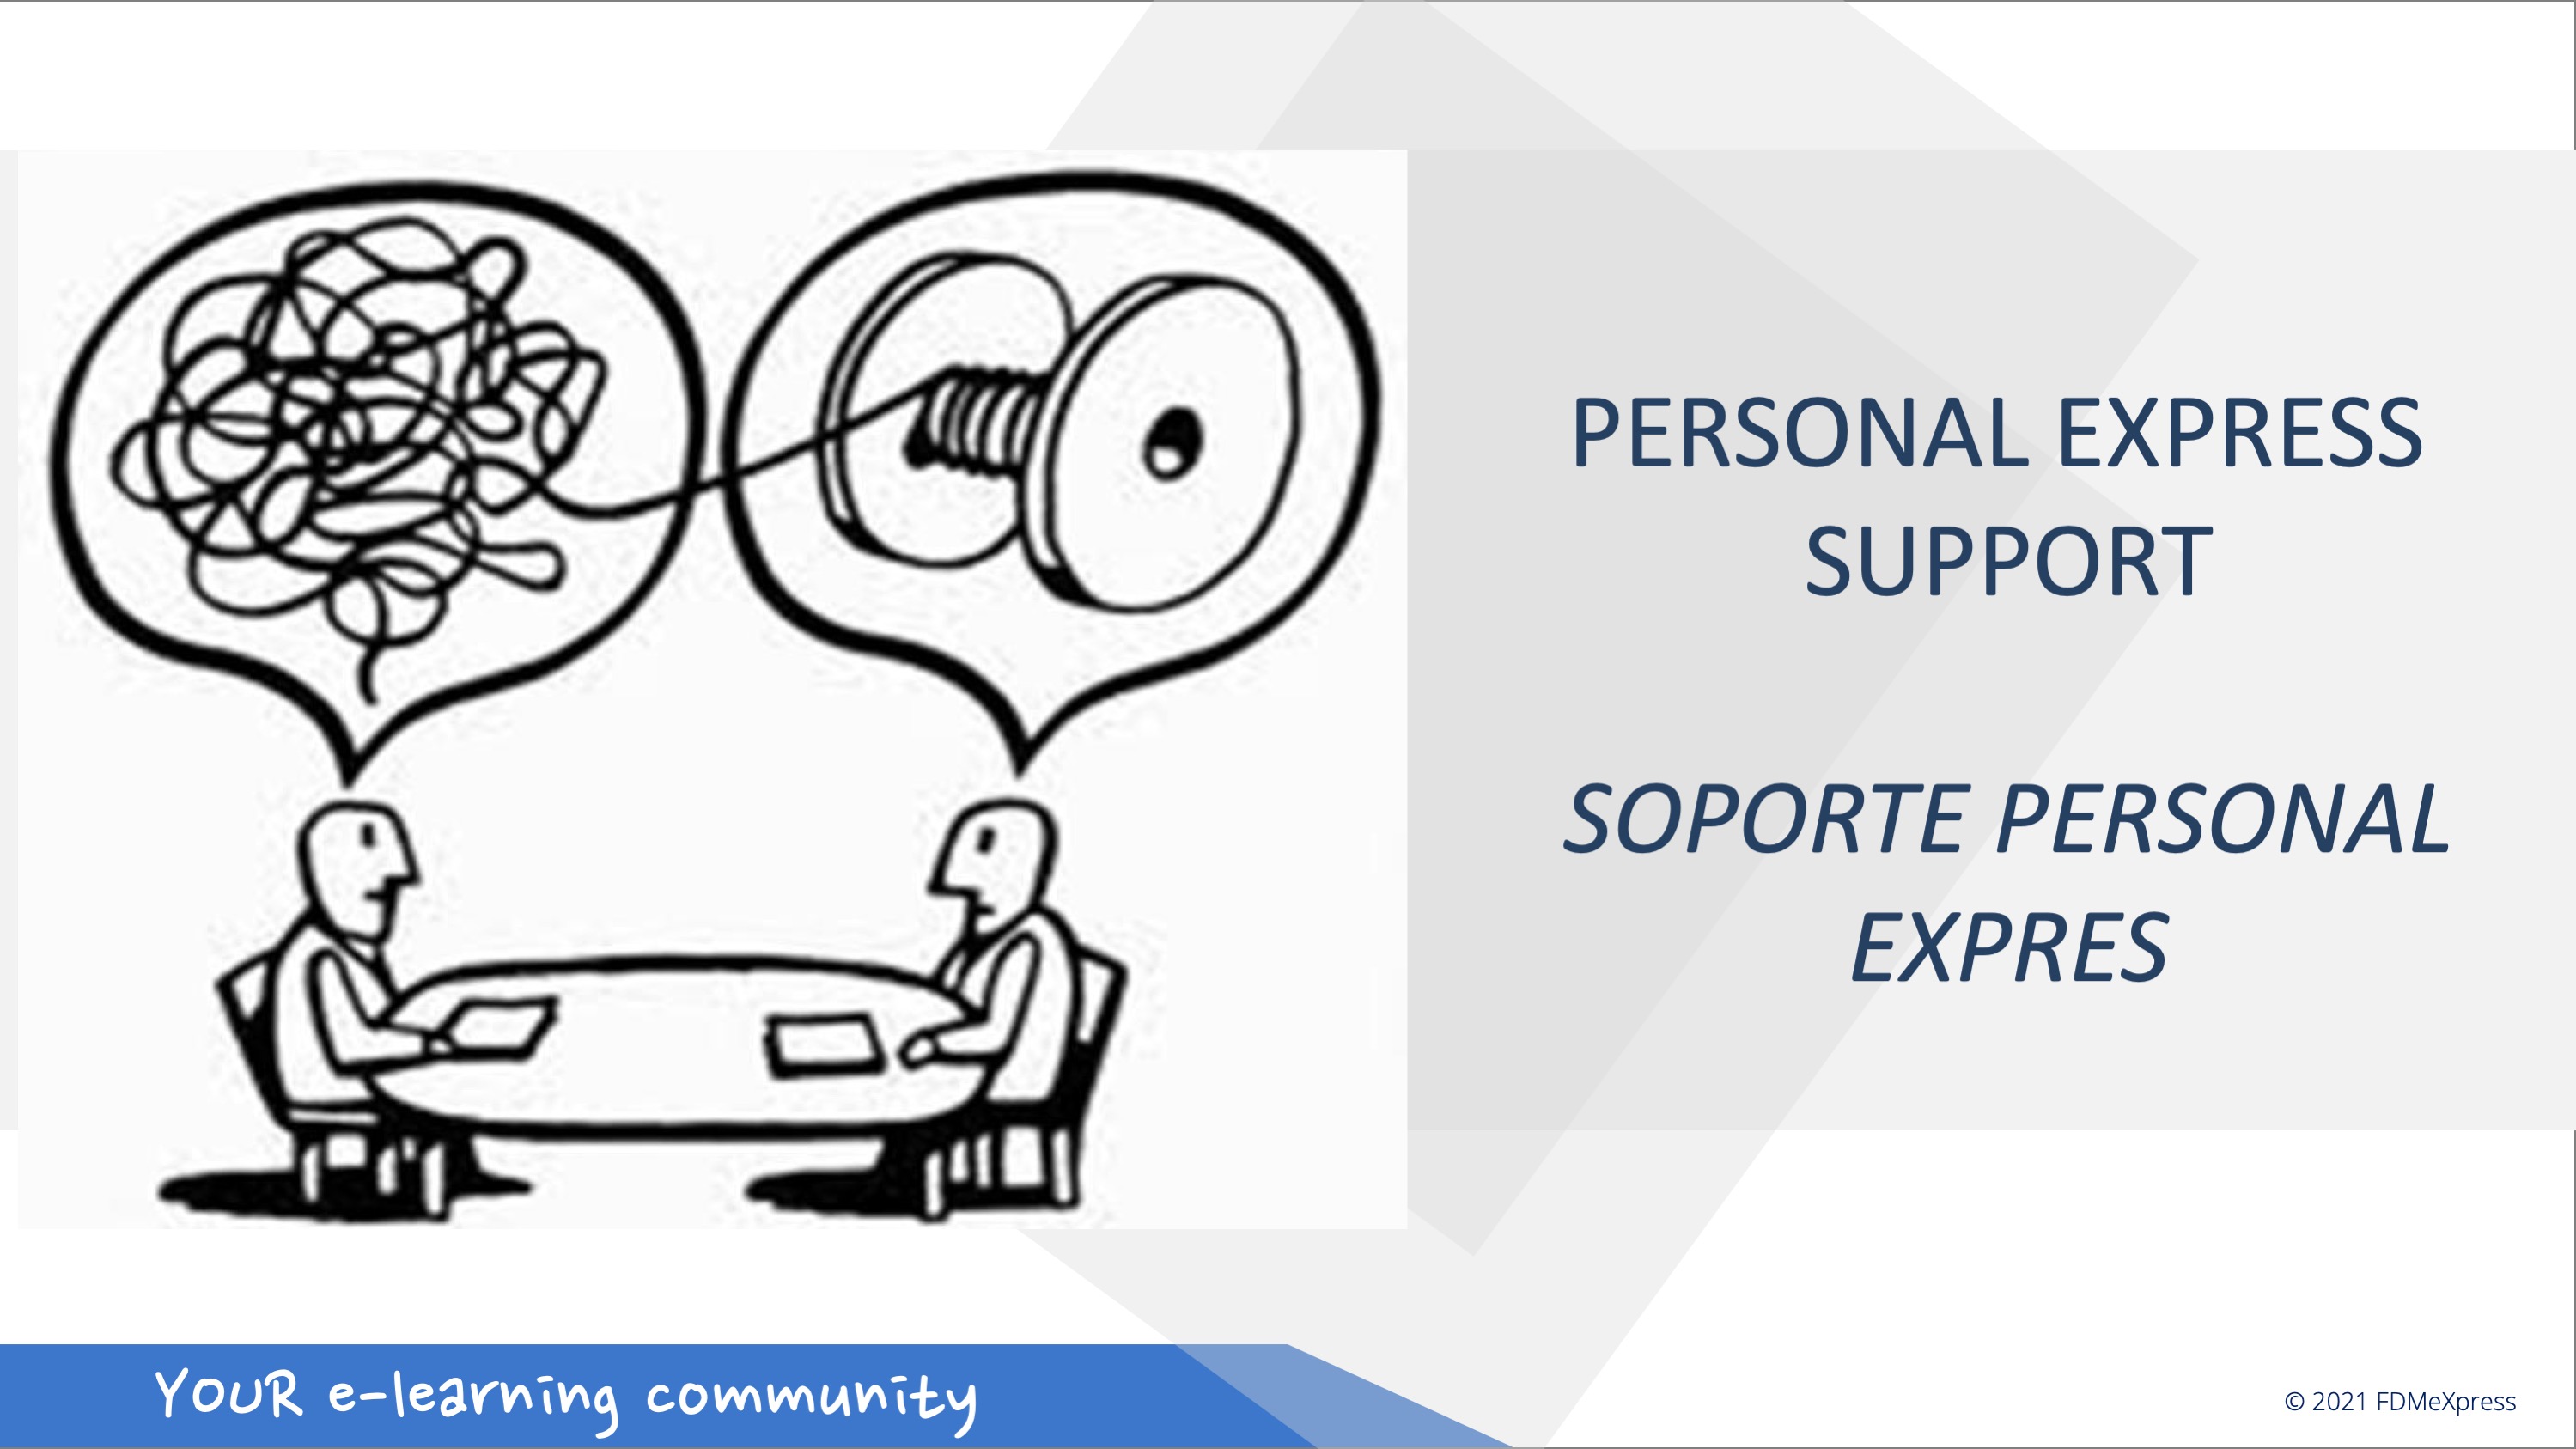 PERSONAL EXPRESS SUPPORT / SOPORTE PERSONAL EXPRES